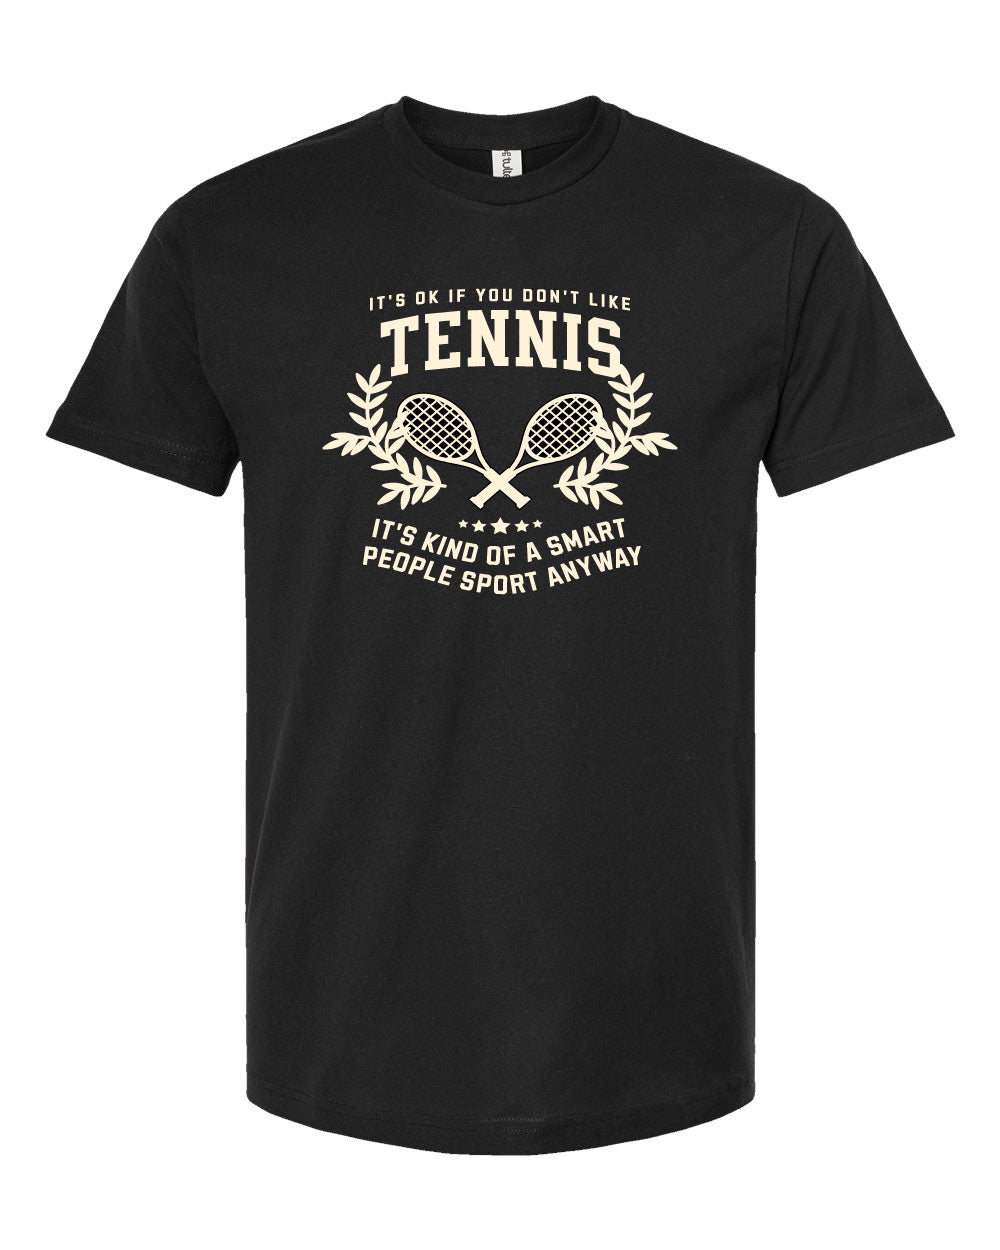 Tennis its a smart people sport Funny T Shirt